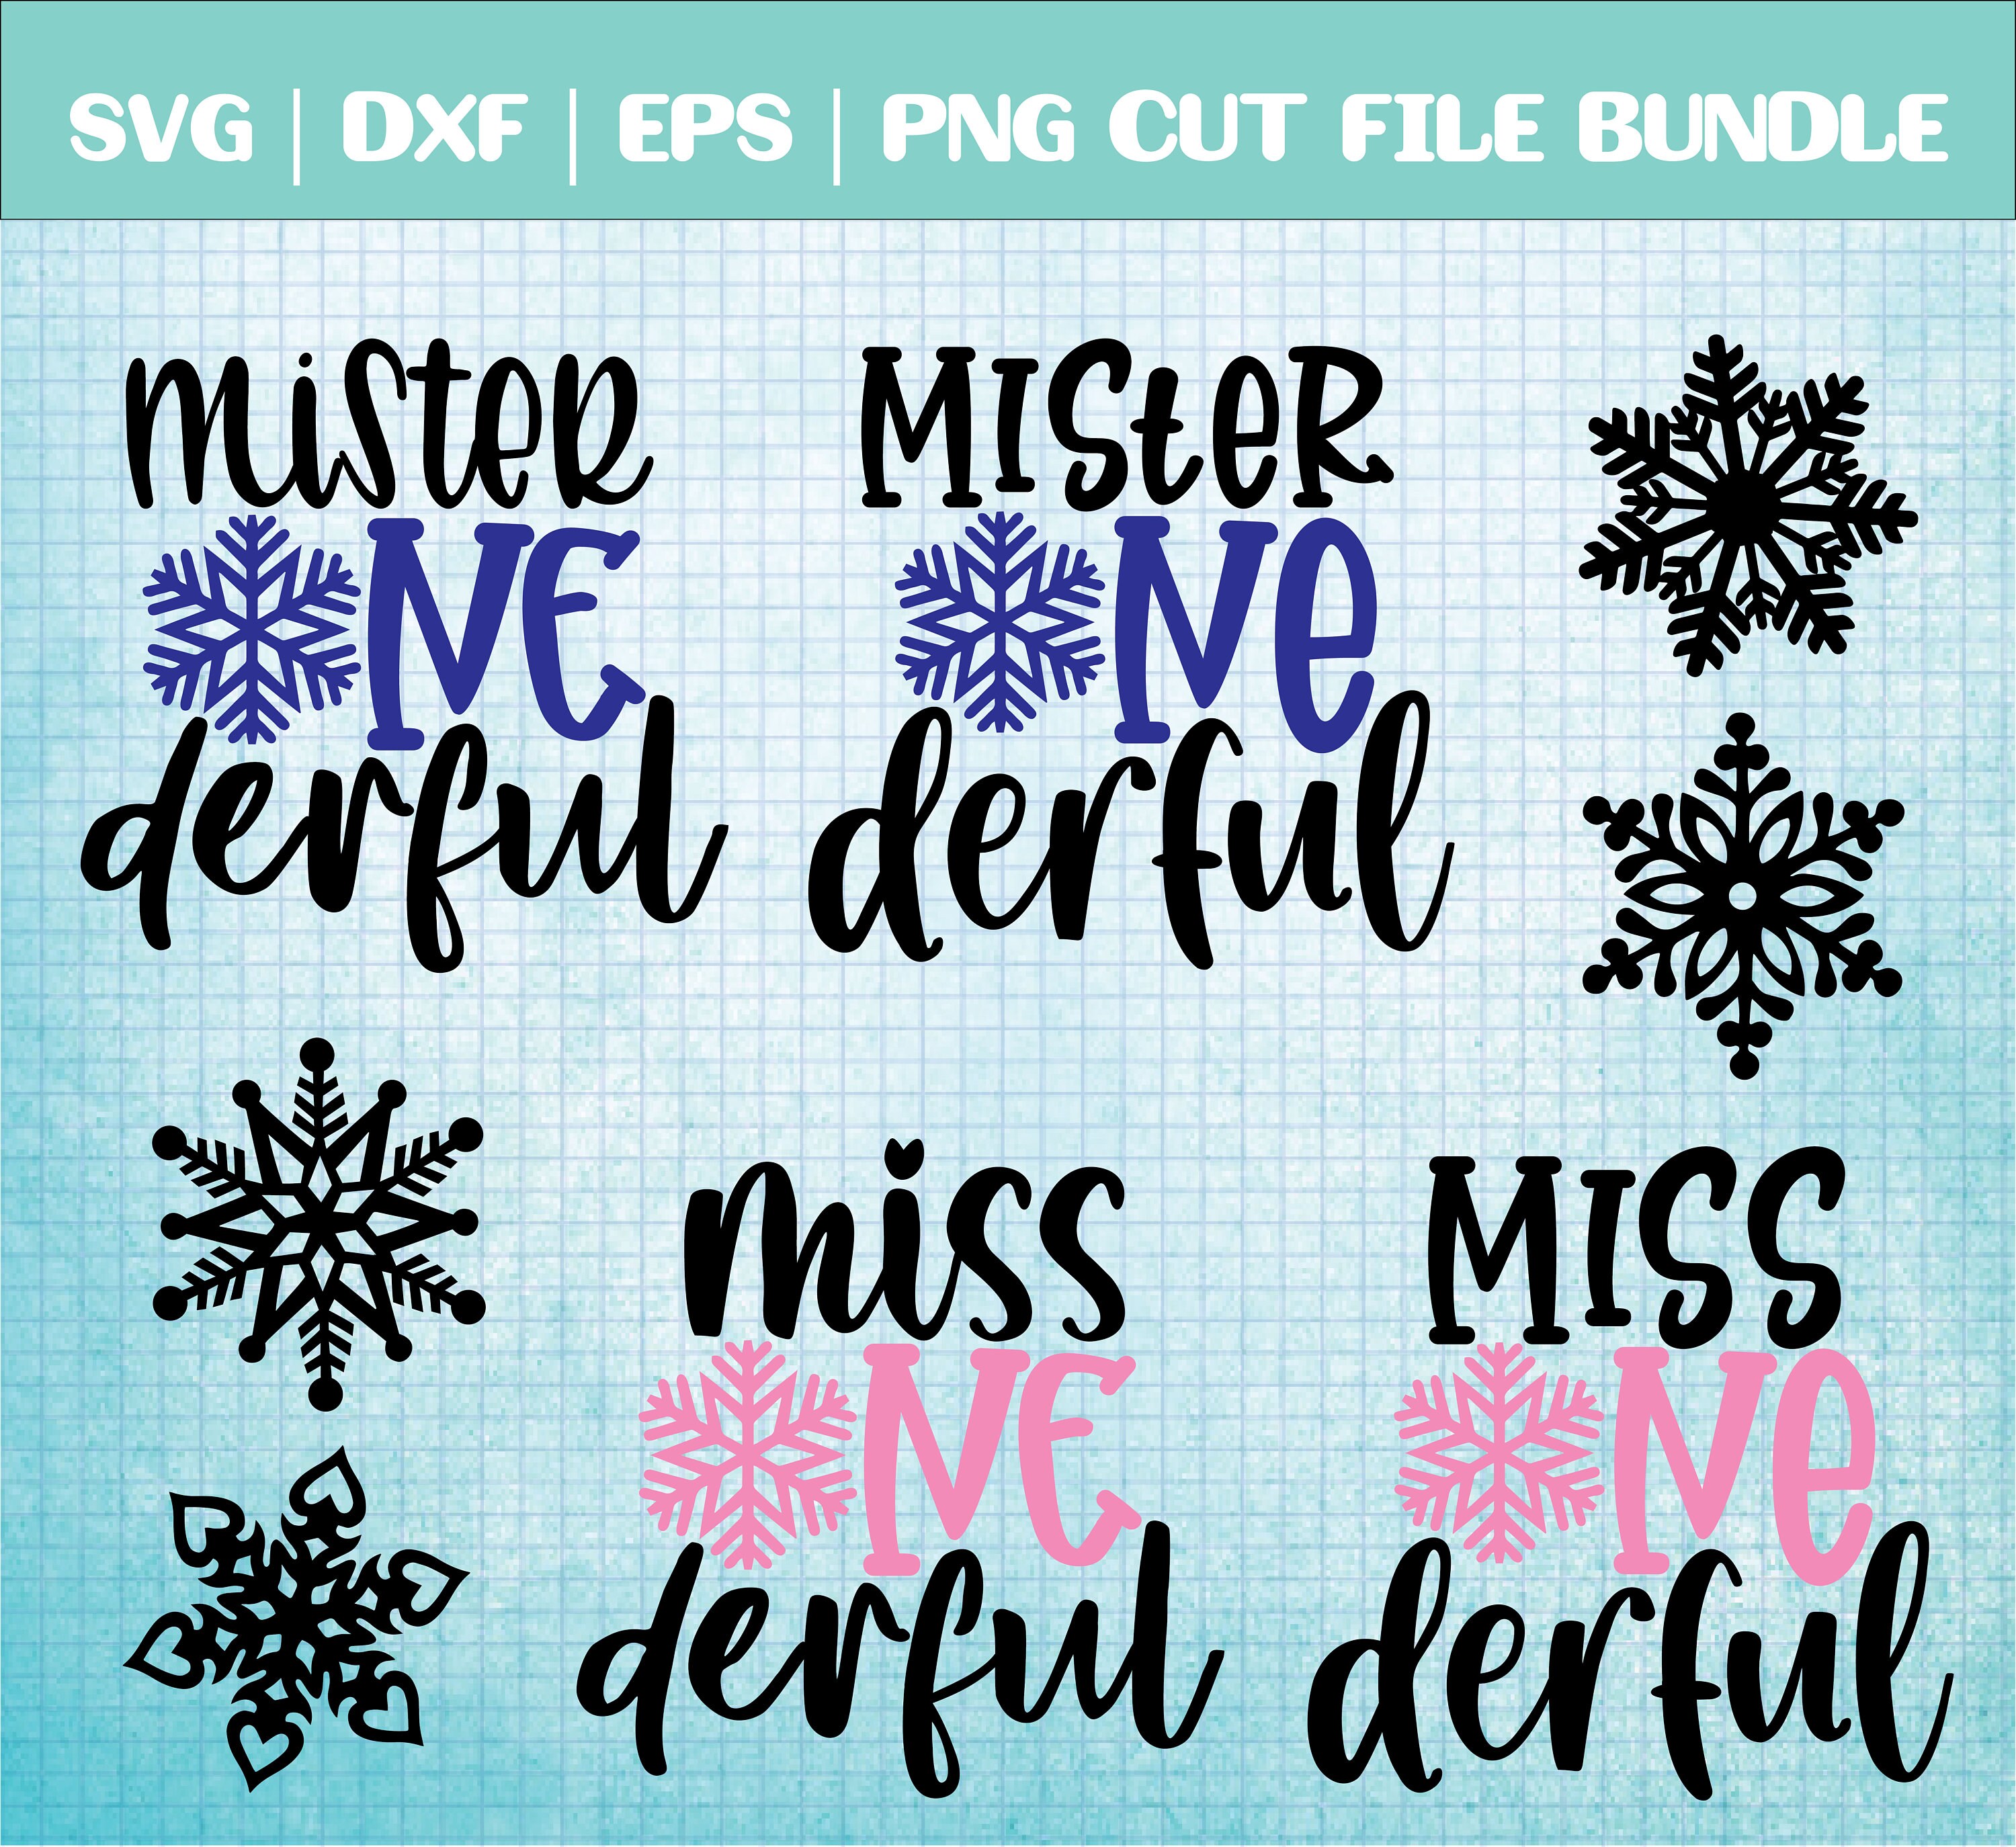 Happy Onederful Snowflake Birthday Party Favors Baby Bridal Shower